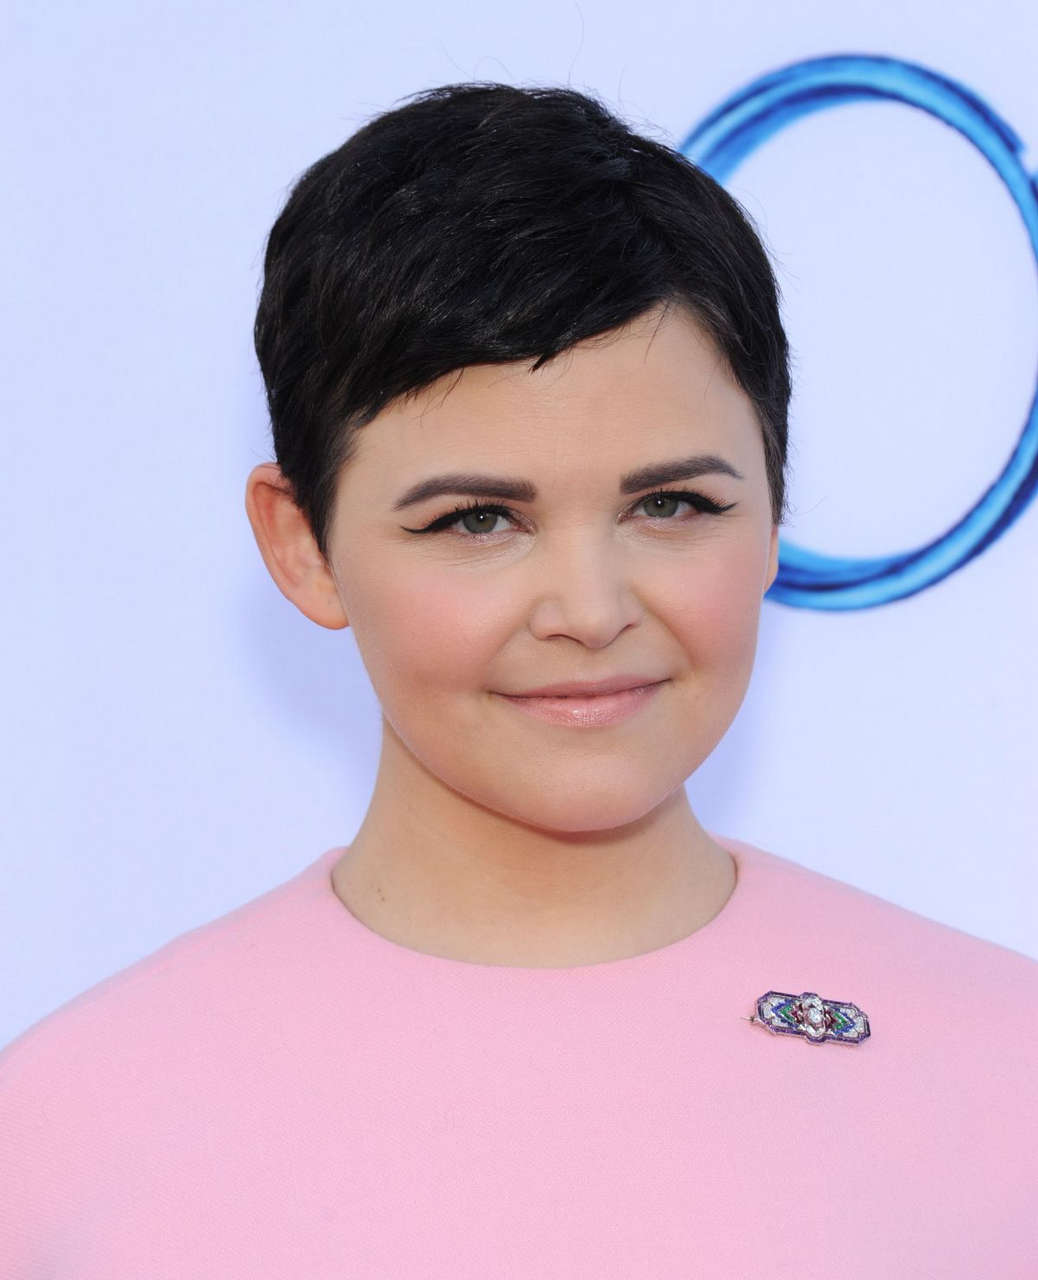 Ginnifer Goodwin Once Upon Time Season 4 Screening Hollywood